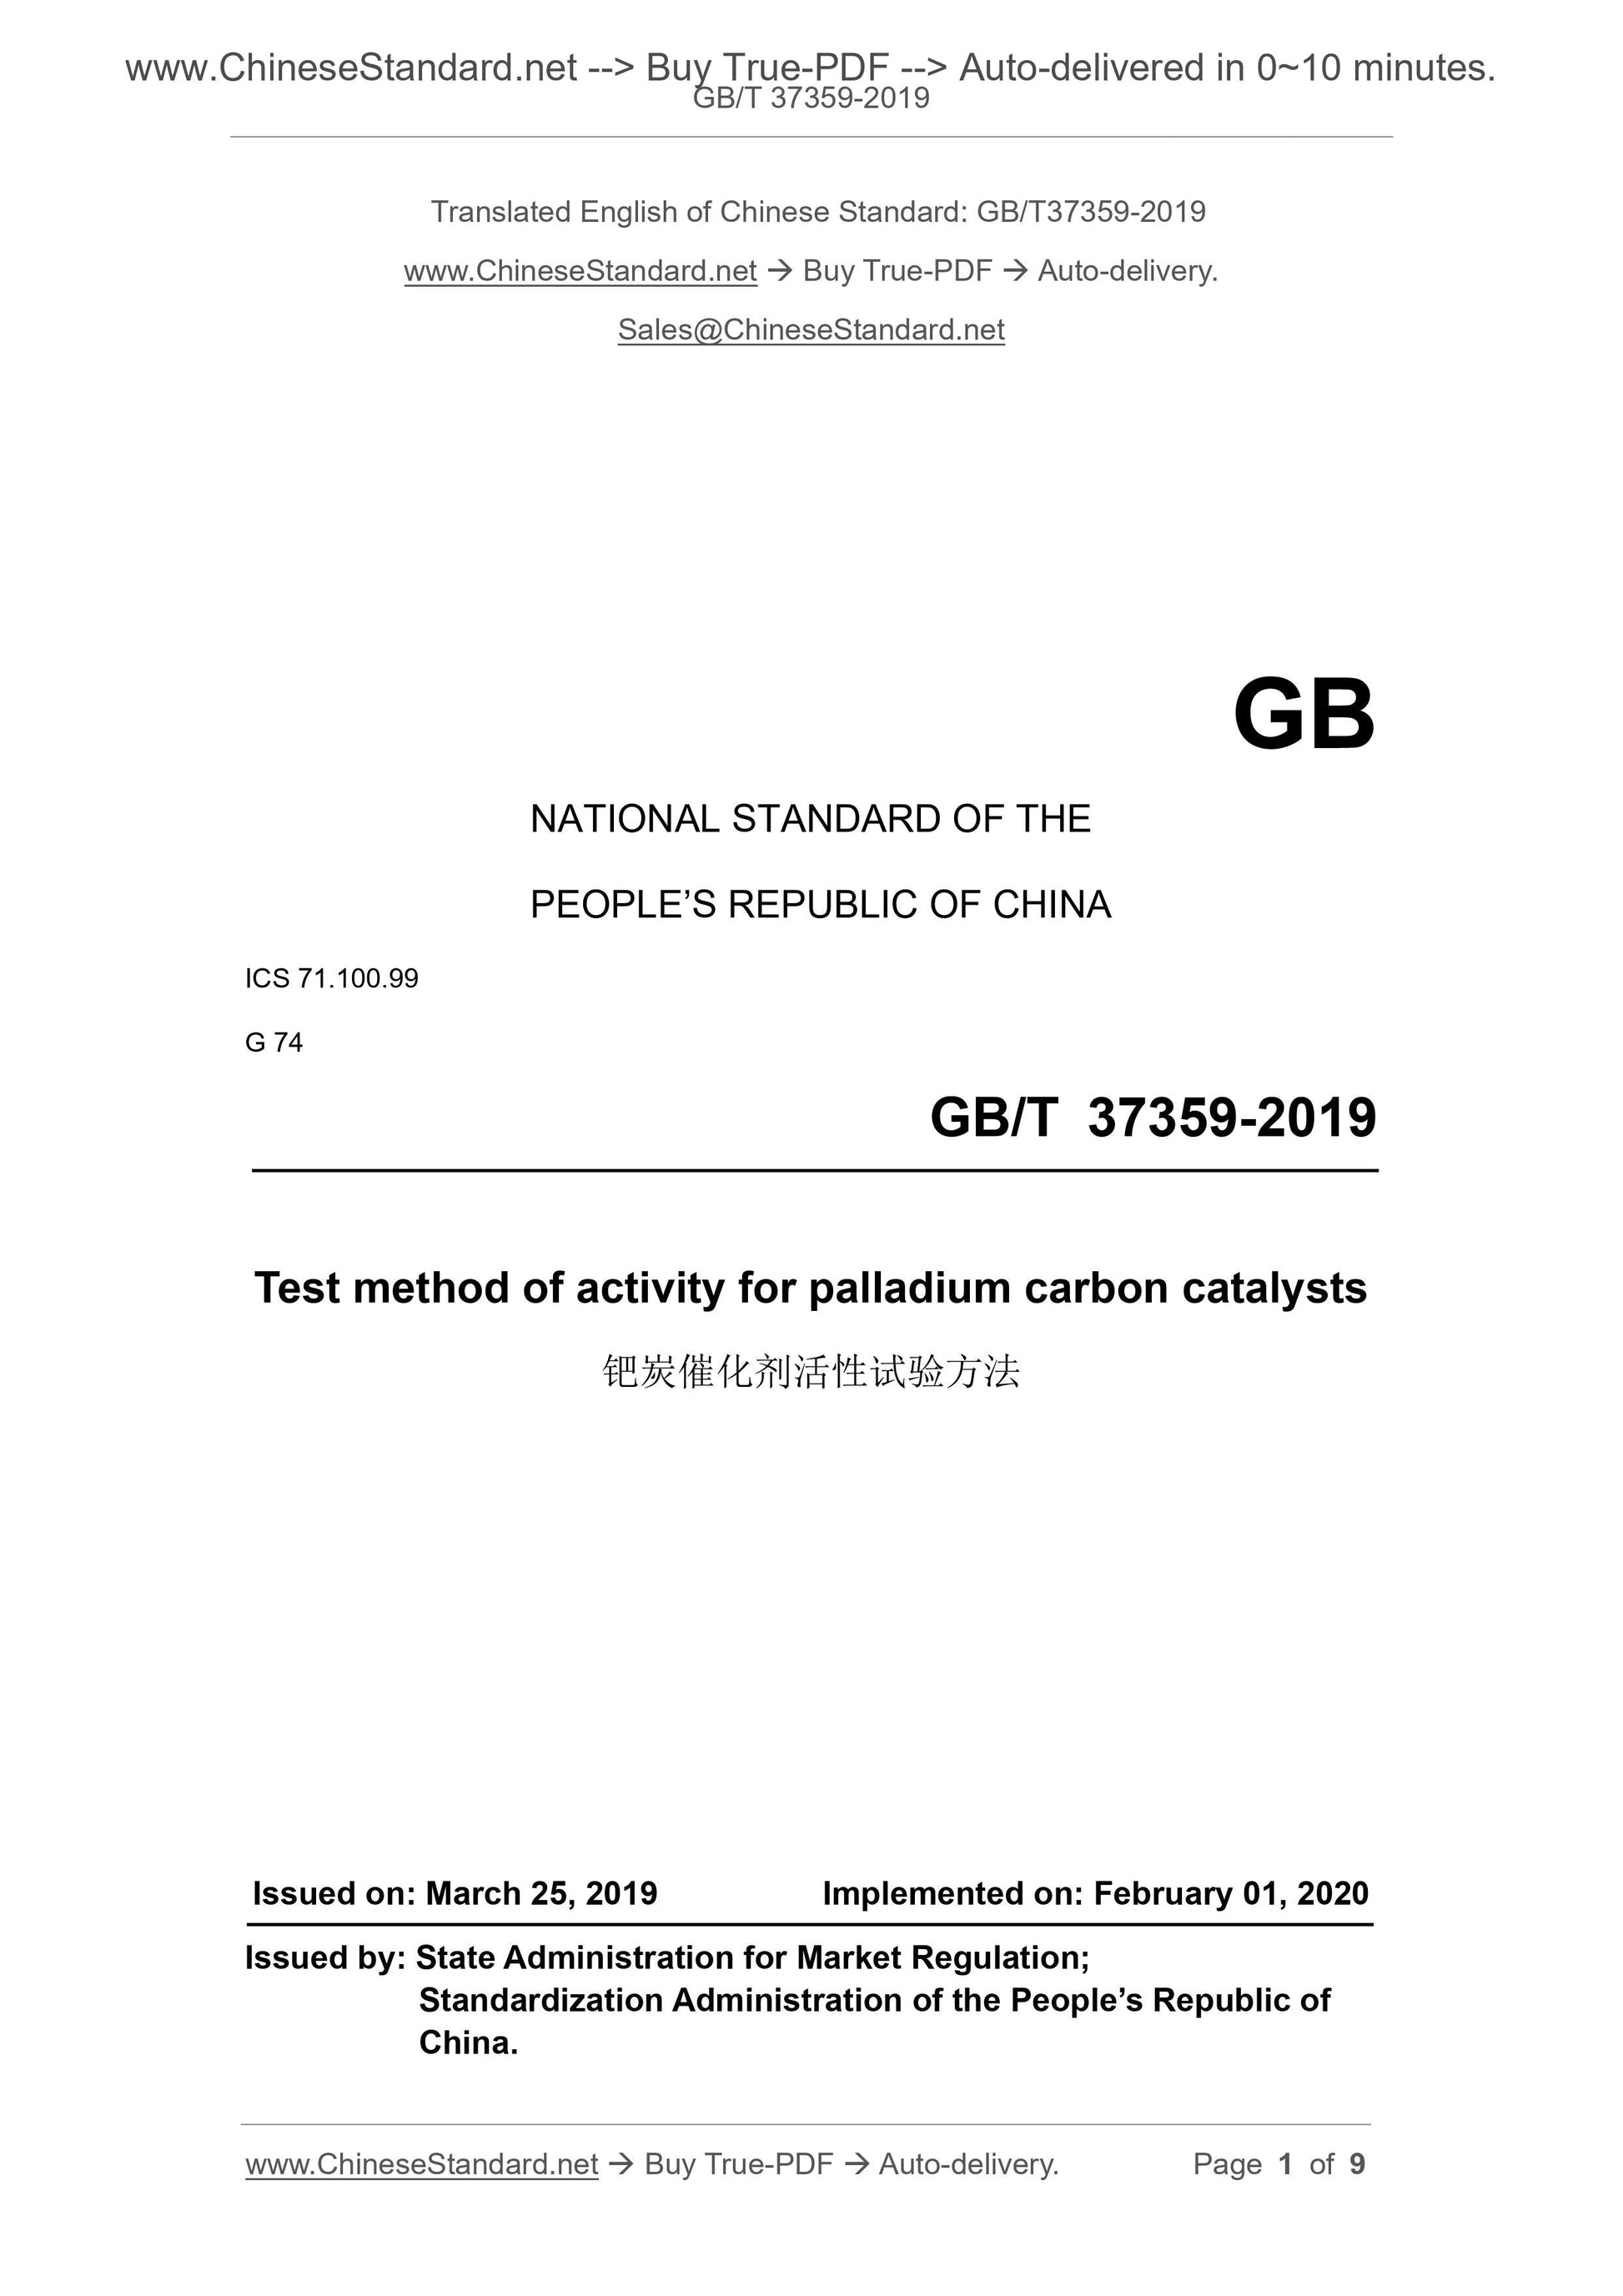 GB/T 37359-2019 Page 1